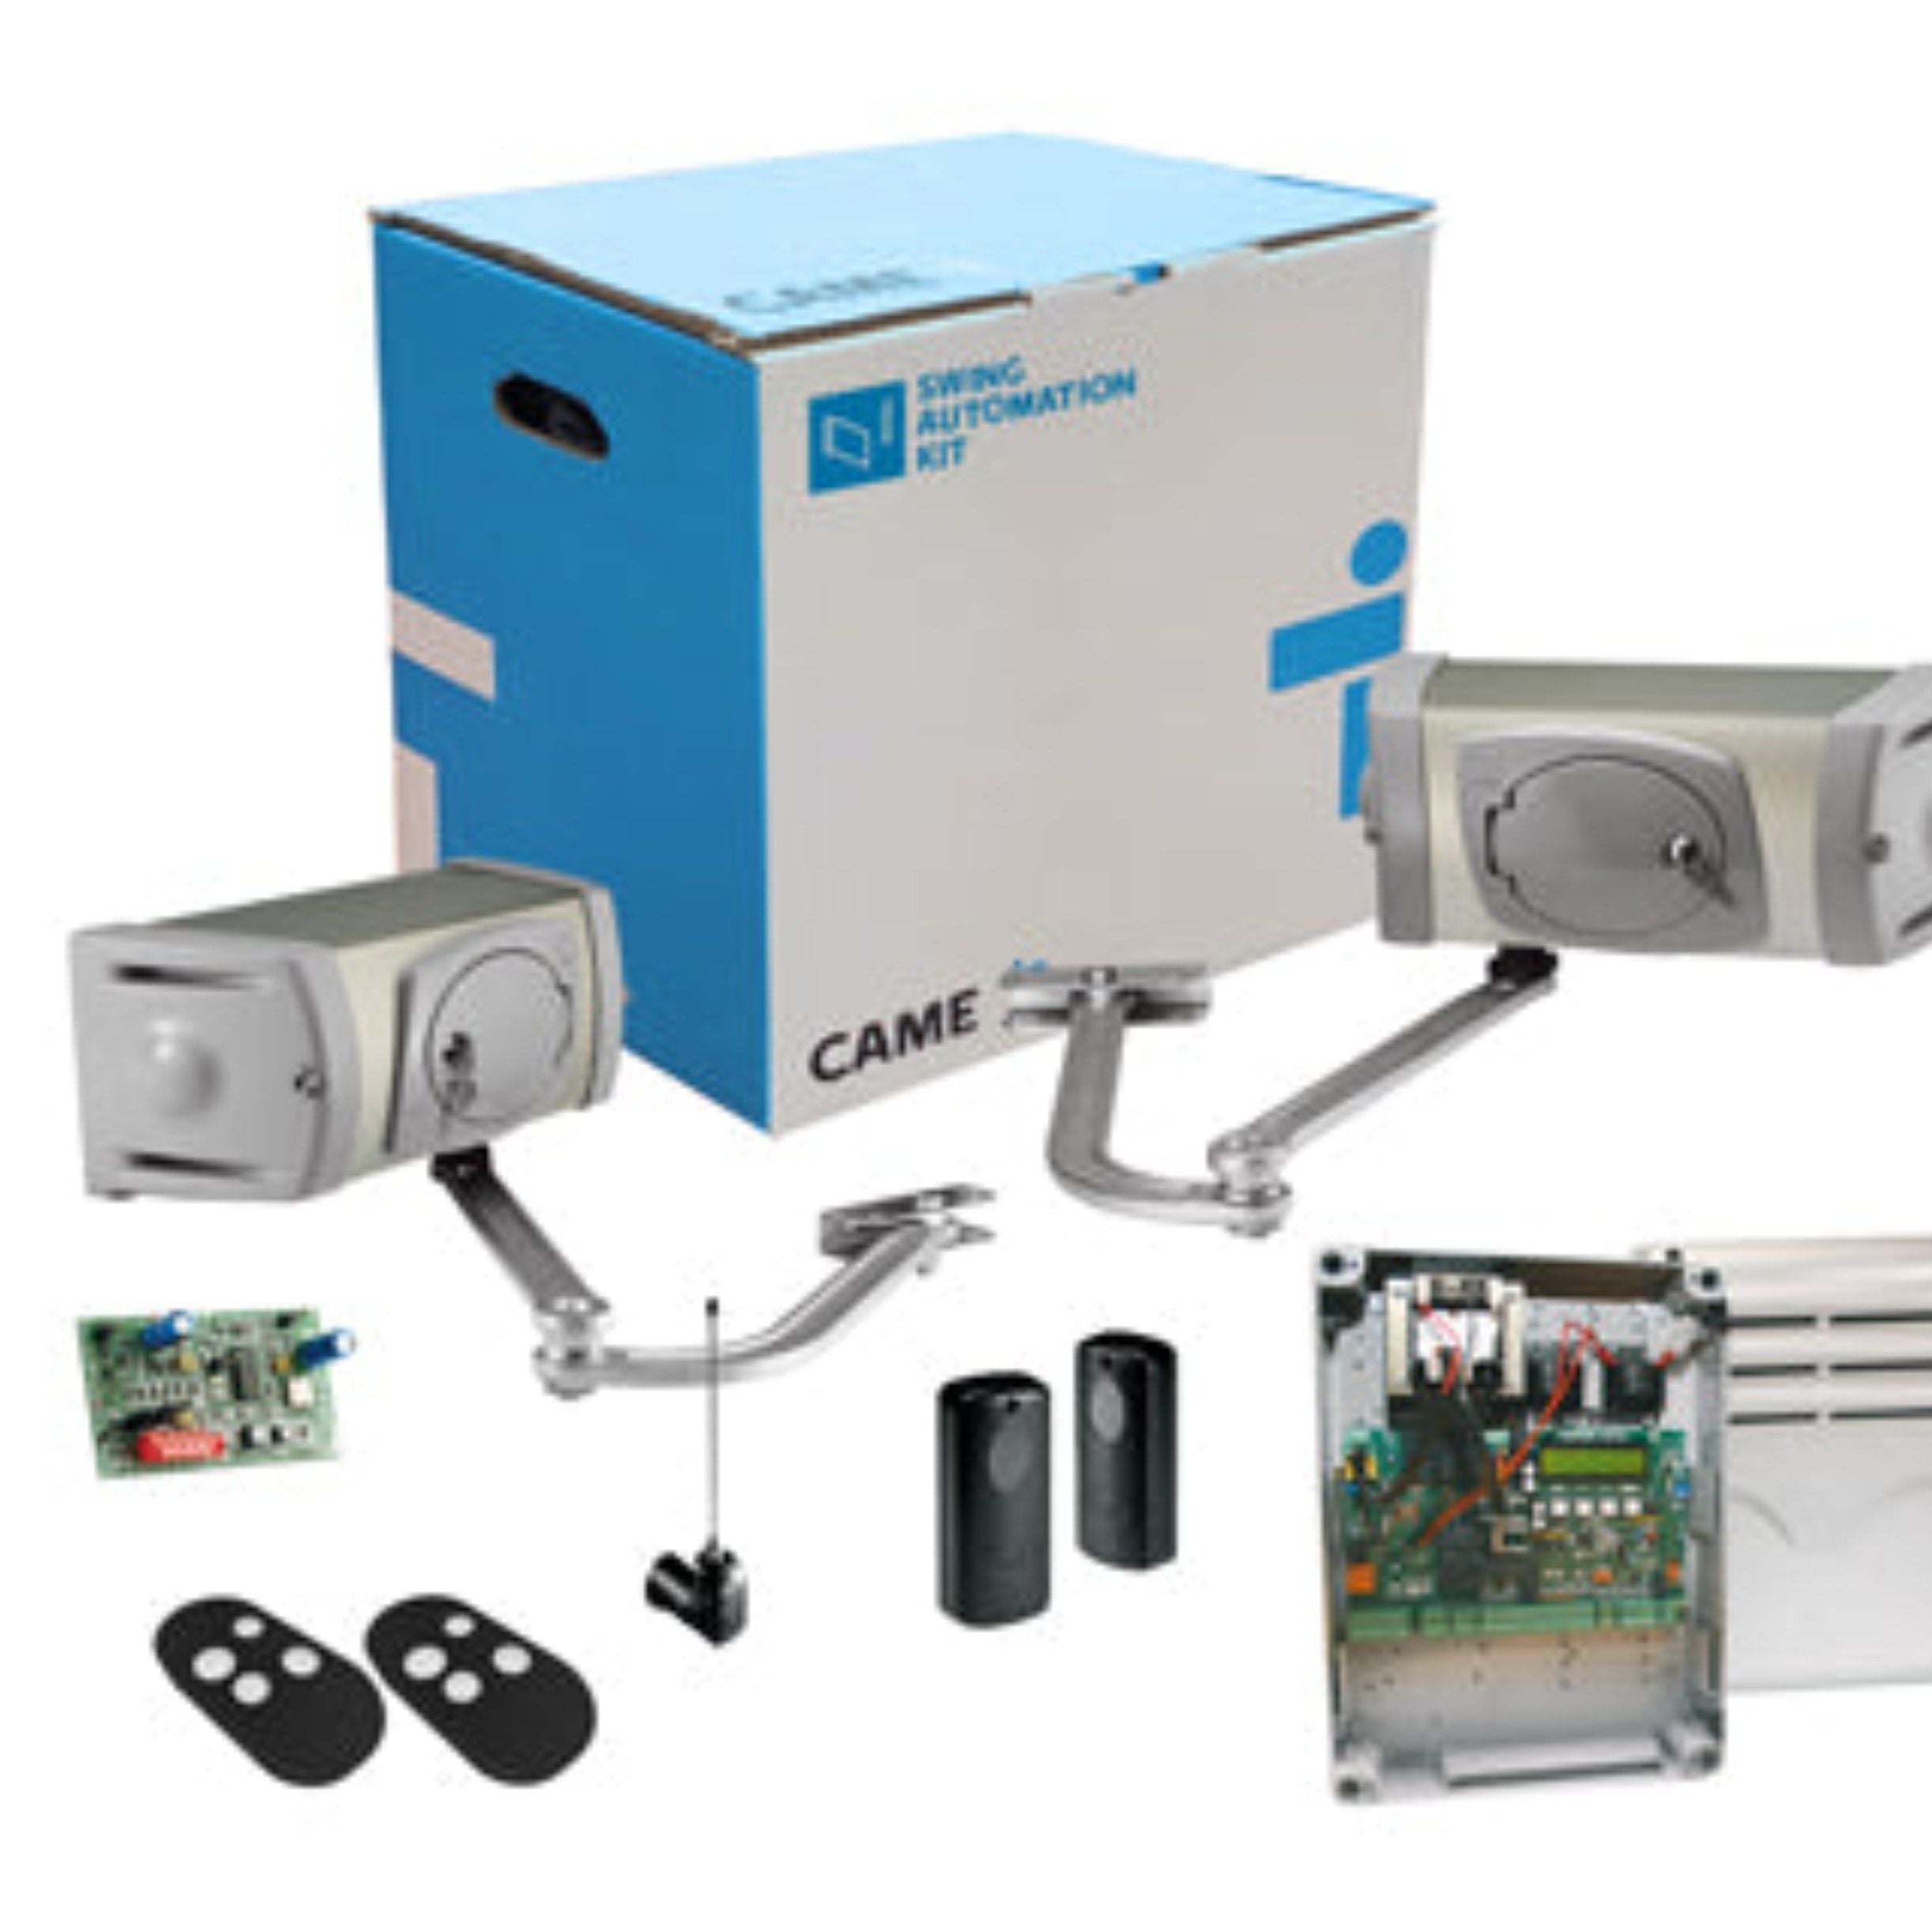 CAME FerniE - 24v Articulated Double Swing Gate Kit